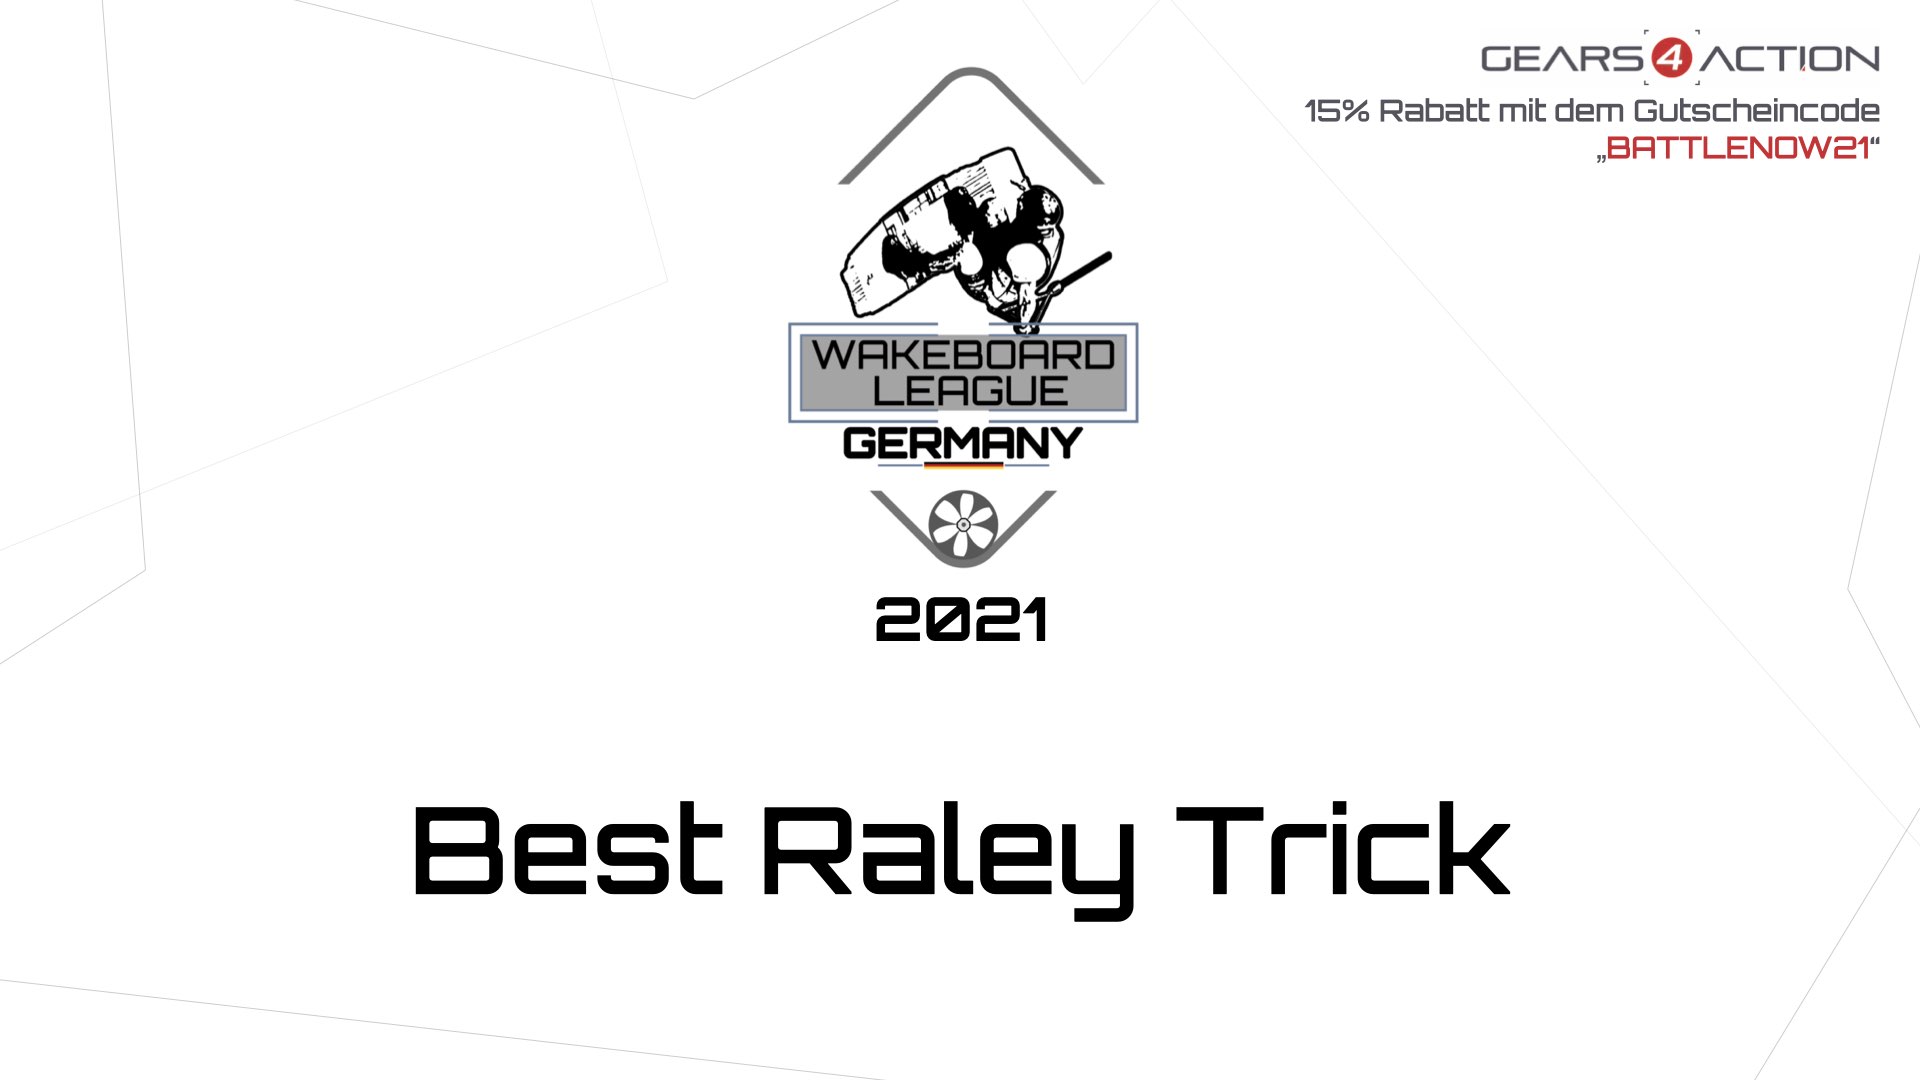 Wakeboard League Germany 2021 - #6 Best Raley Trick